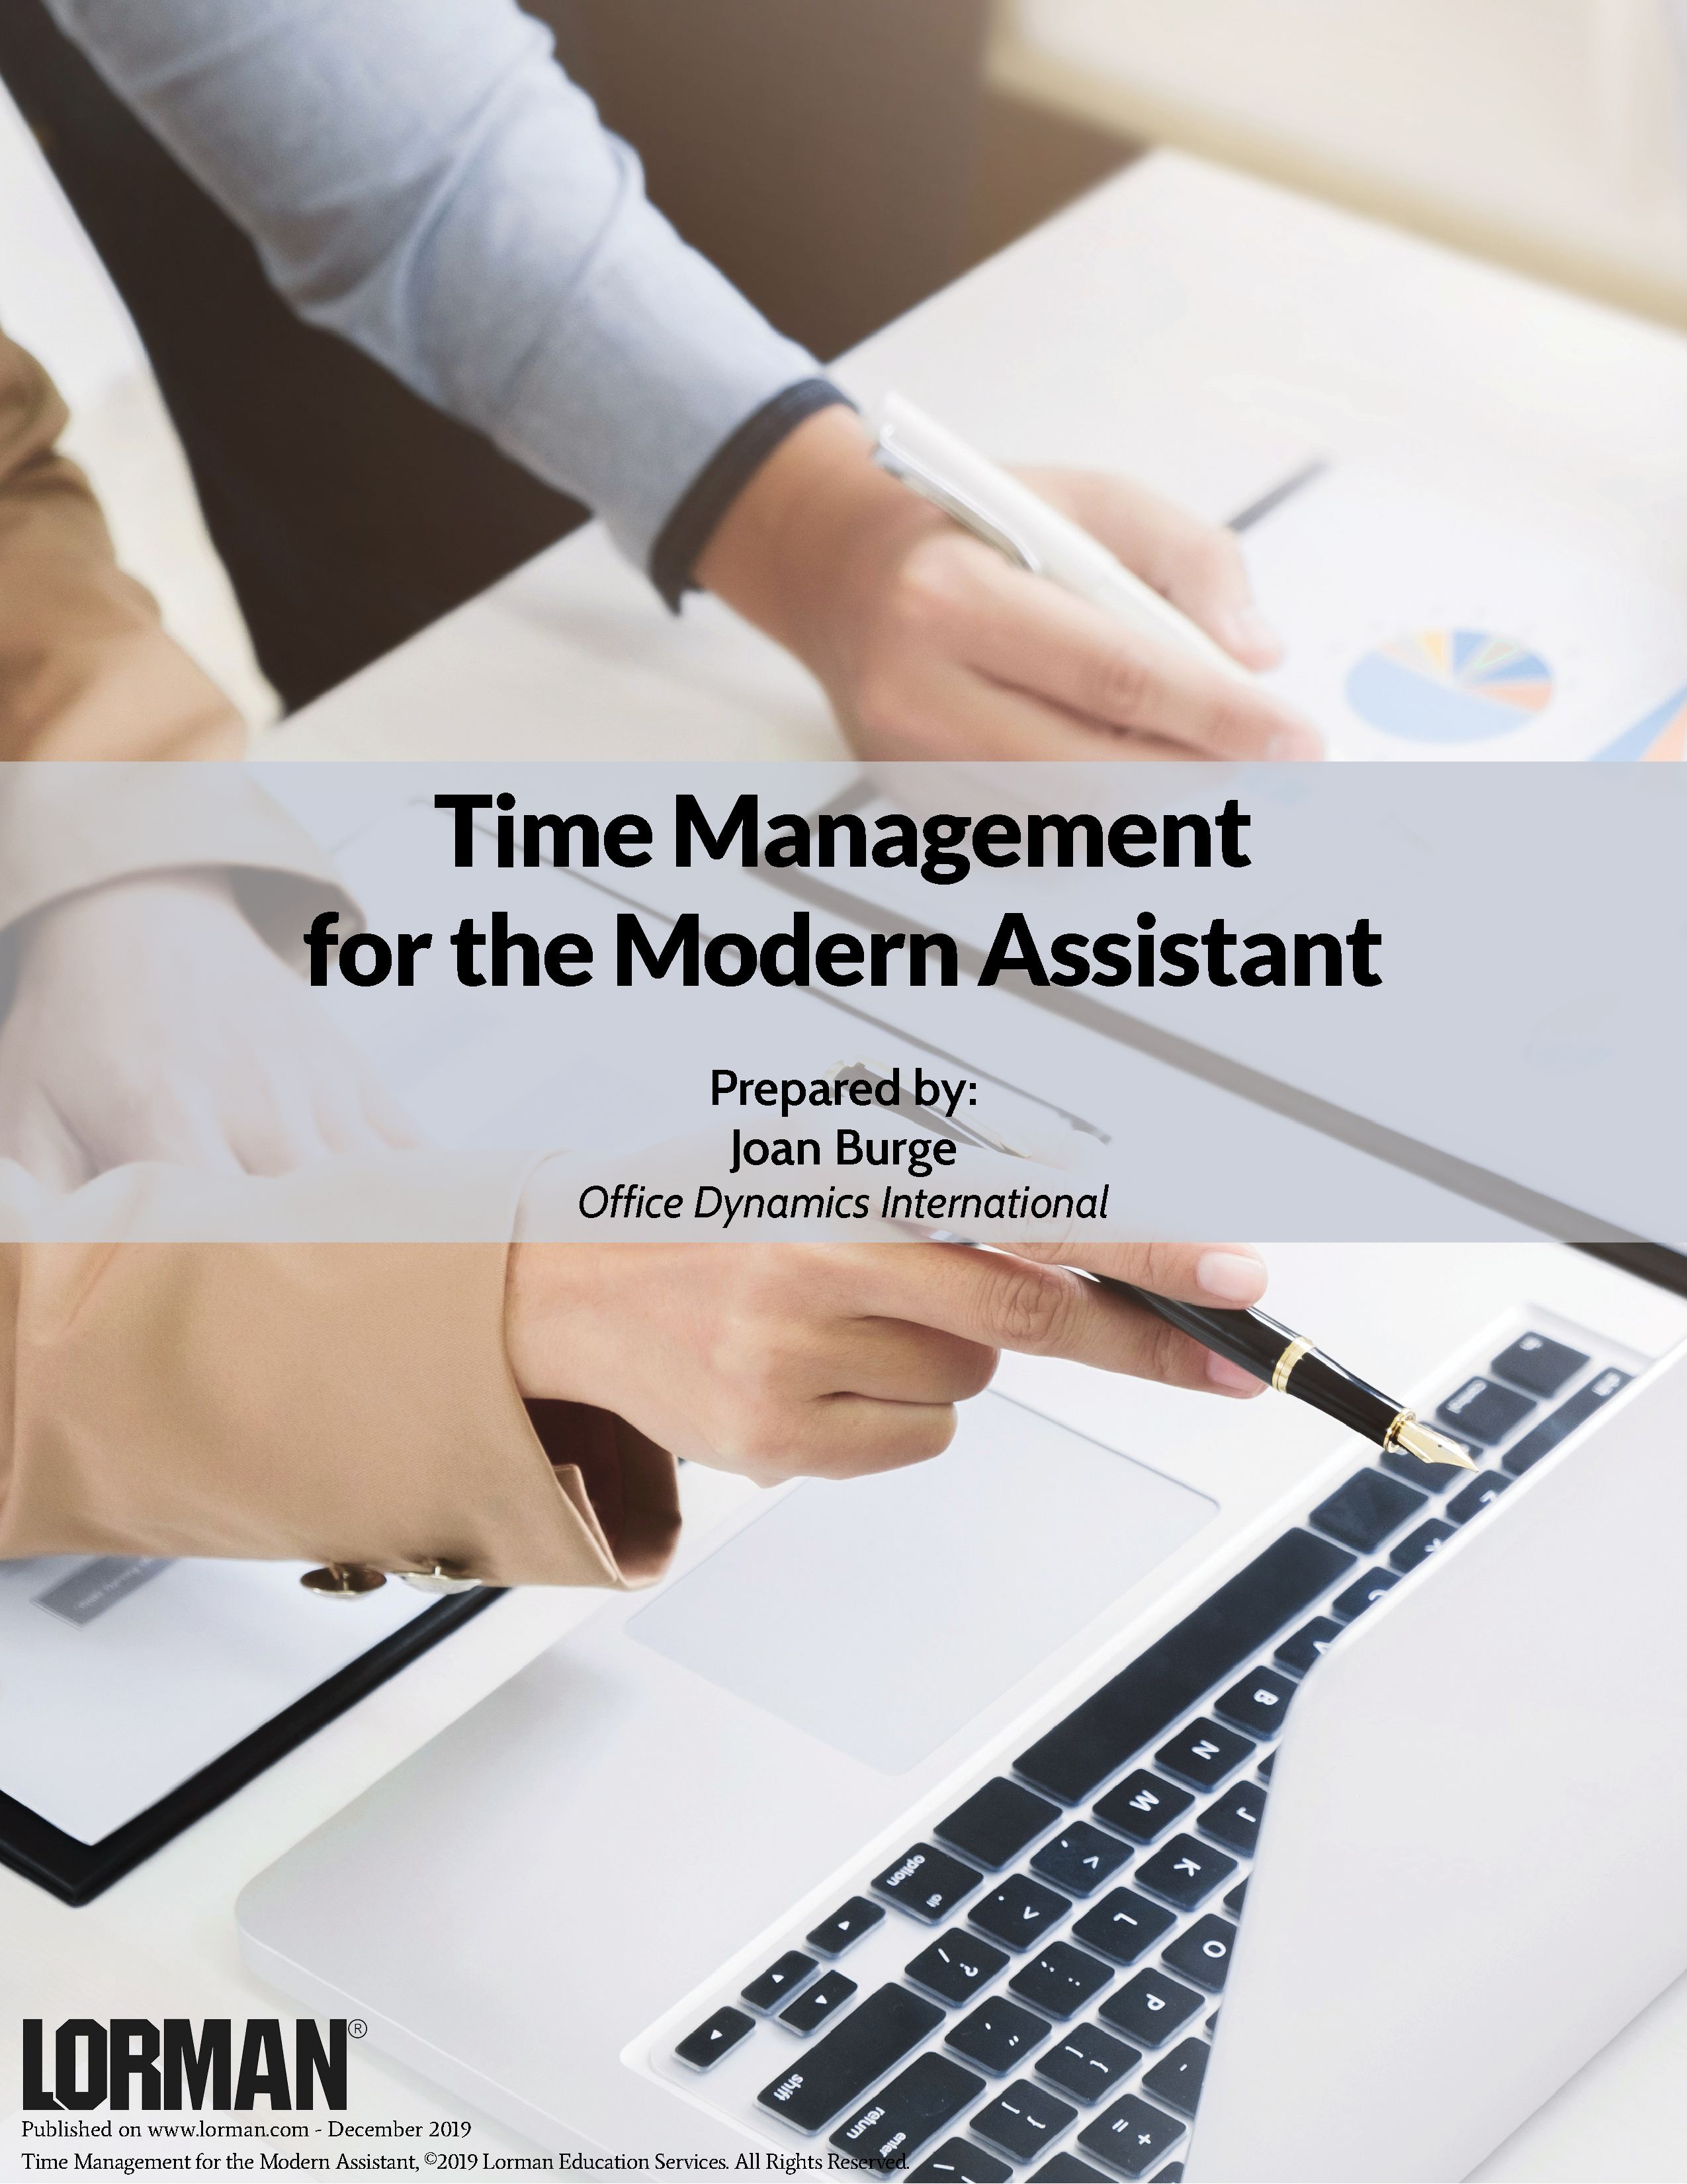 Time Management for the Modern Assistant